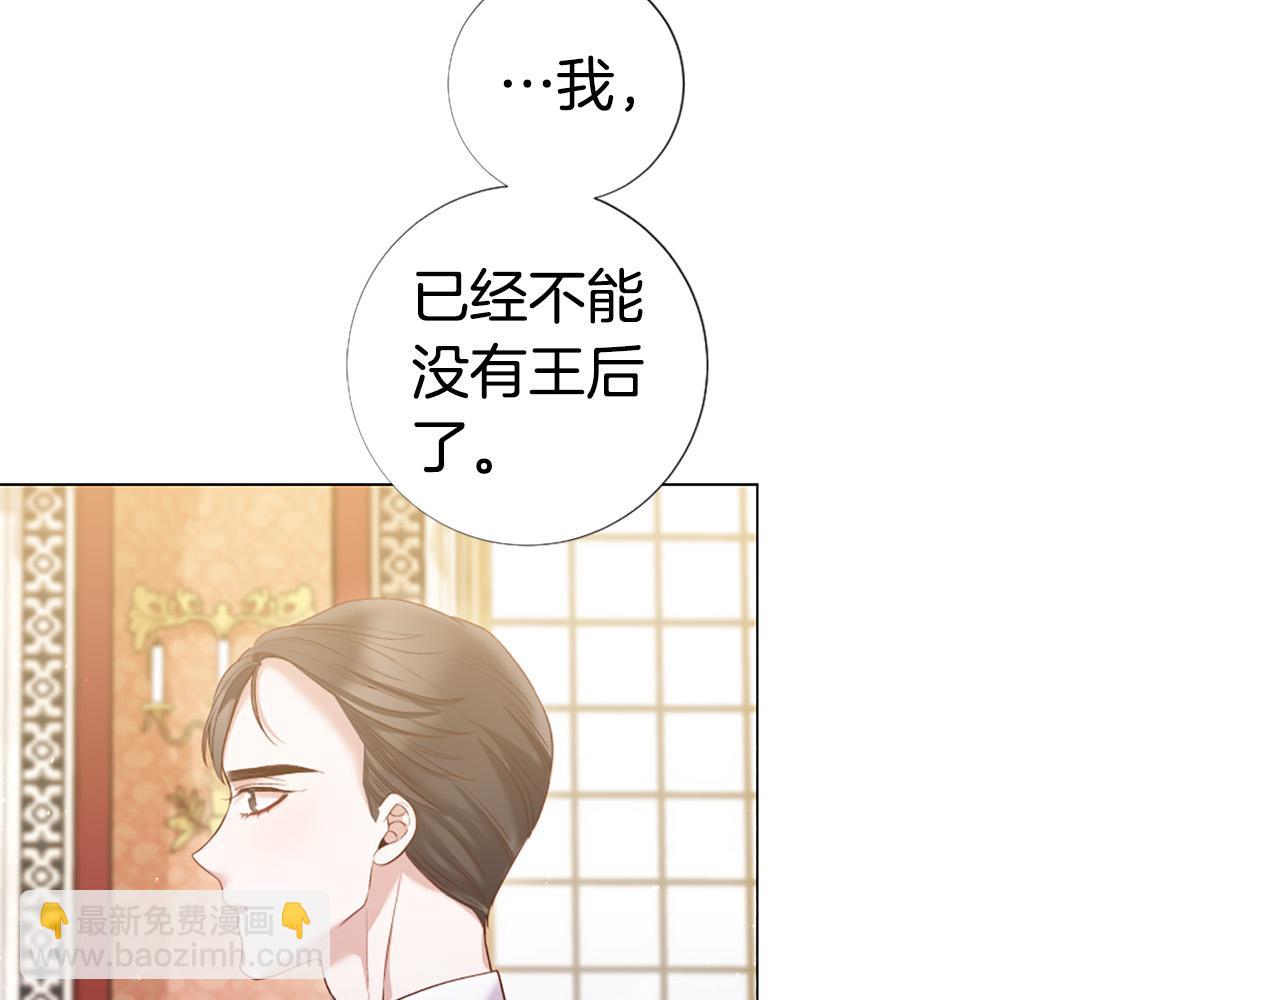 Lady to Queen-勝者爲後 - 第98話 討好(2/3) - 5